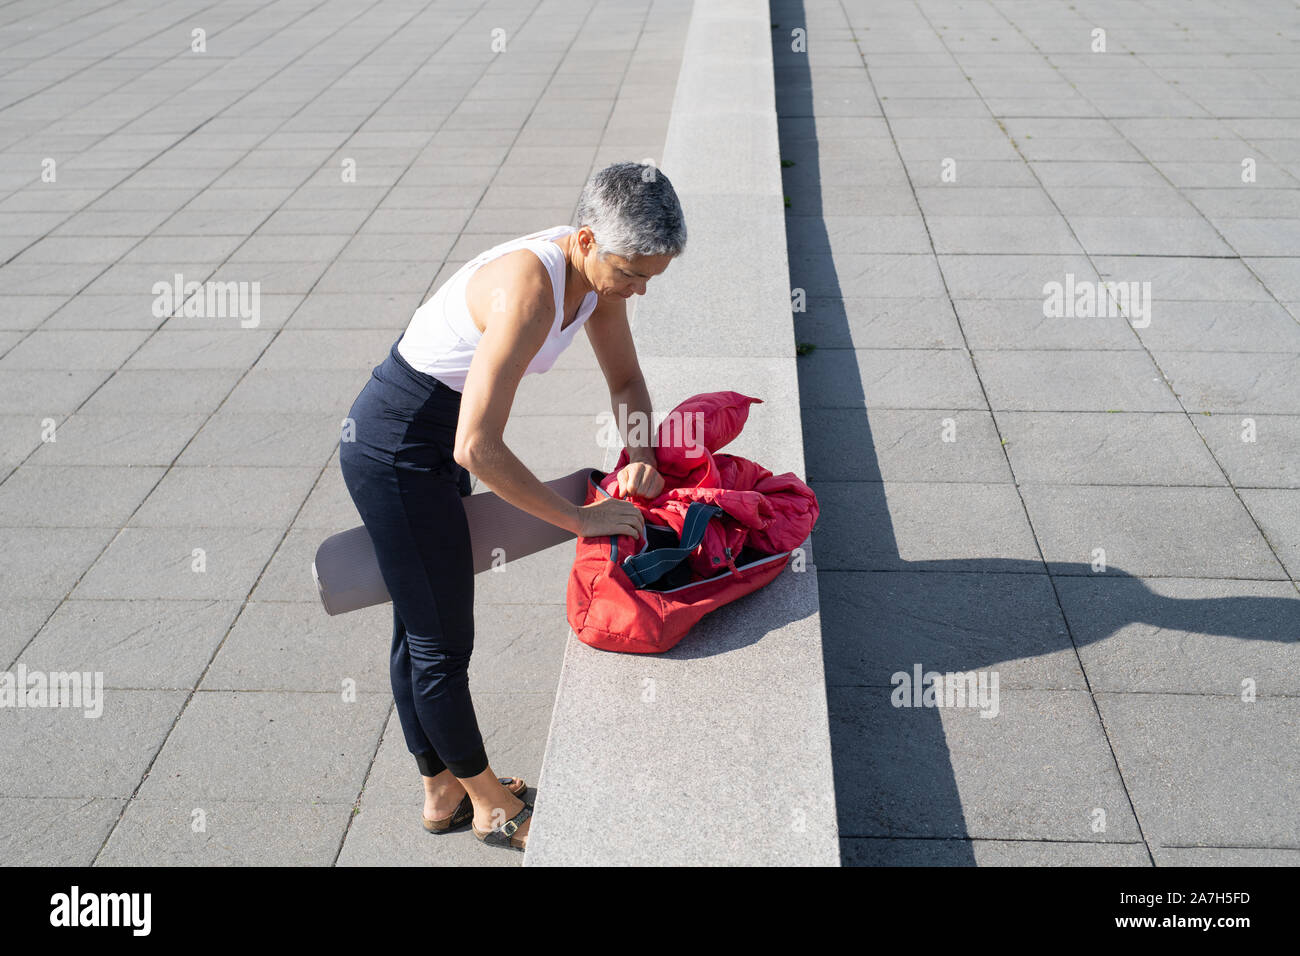 Middle-aged woman packing up yoga gear by ocean Stock Photo